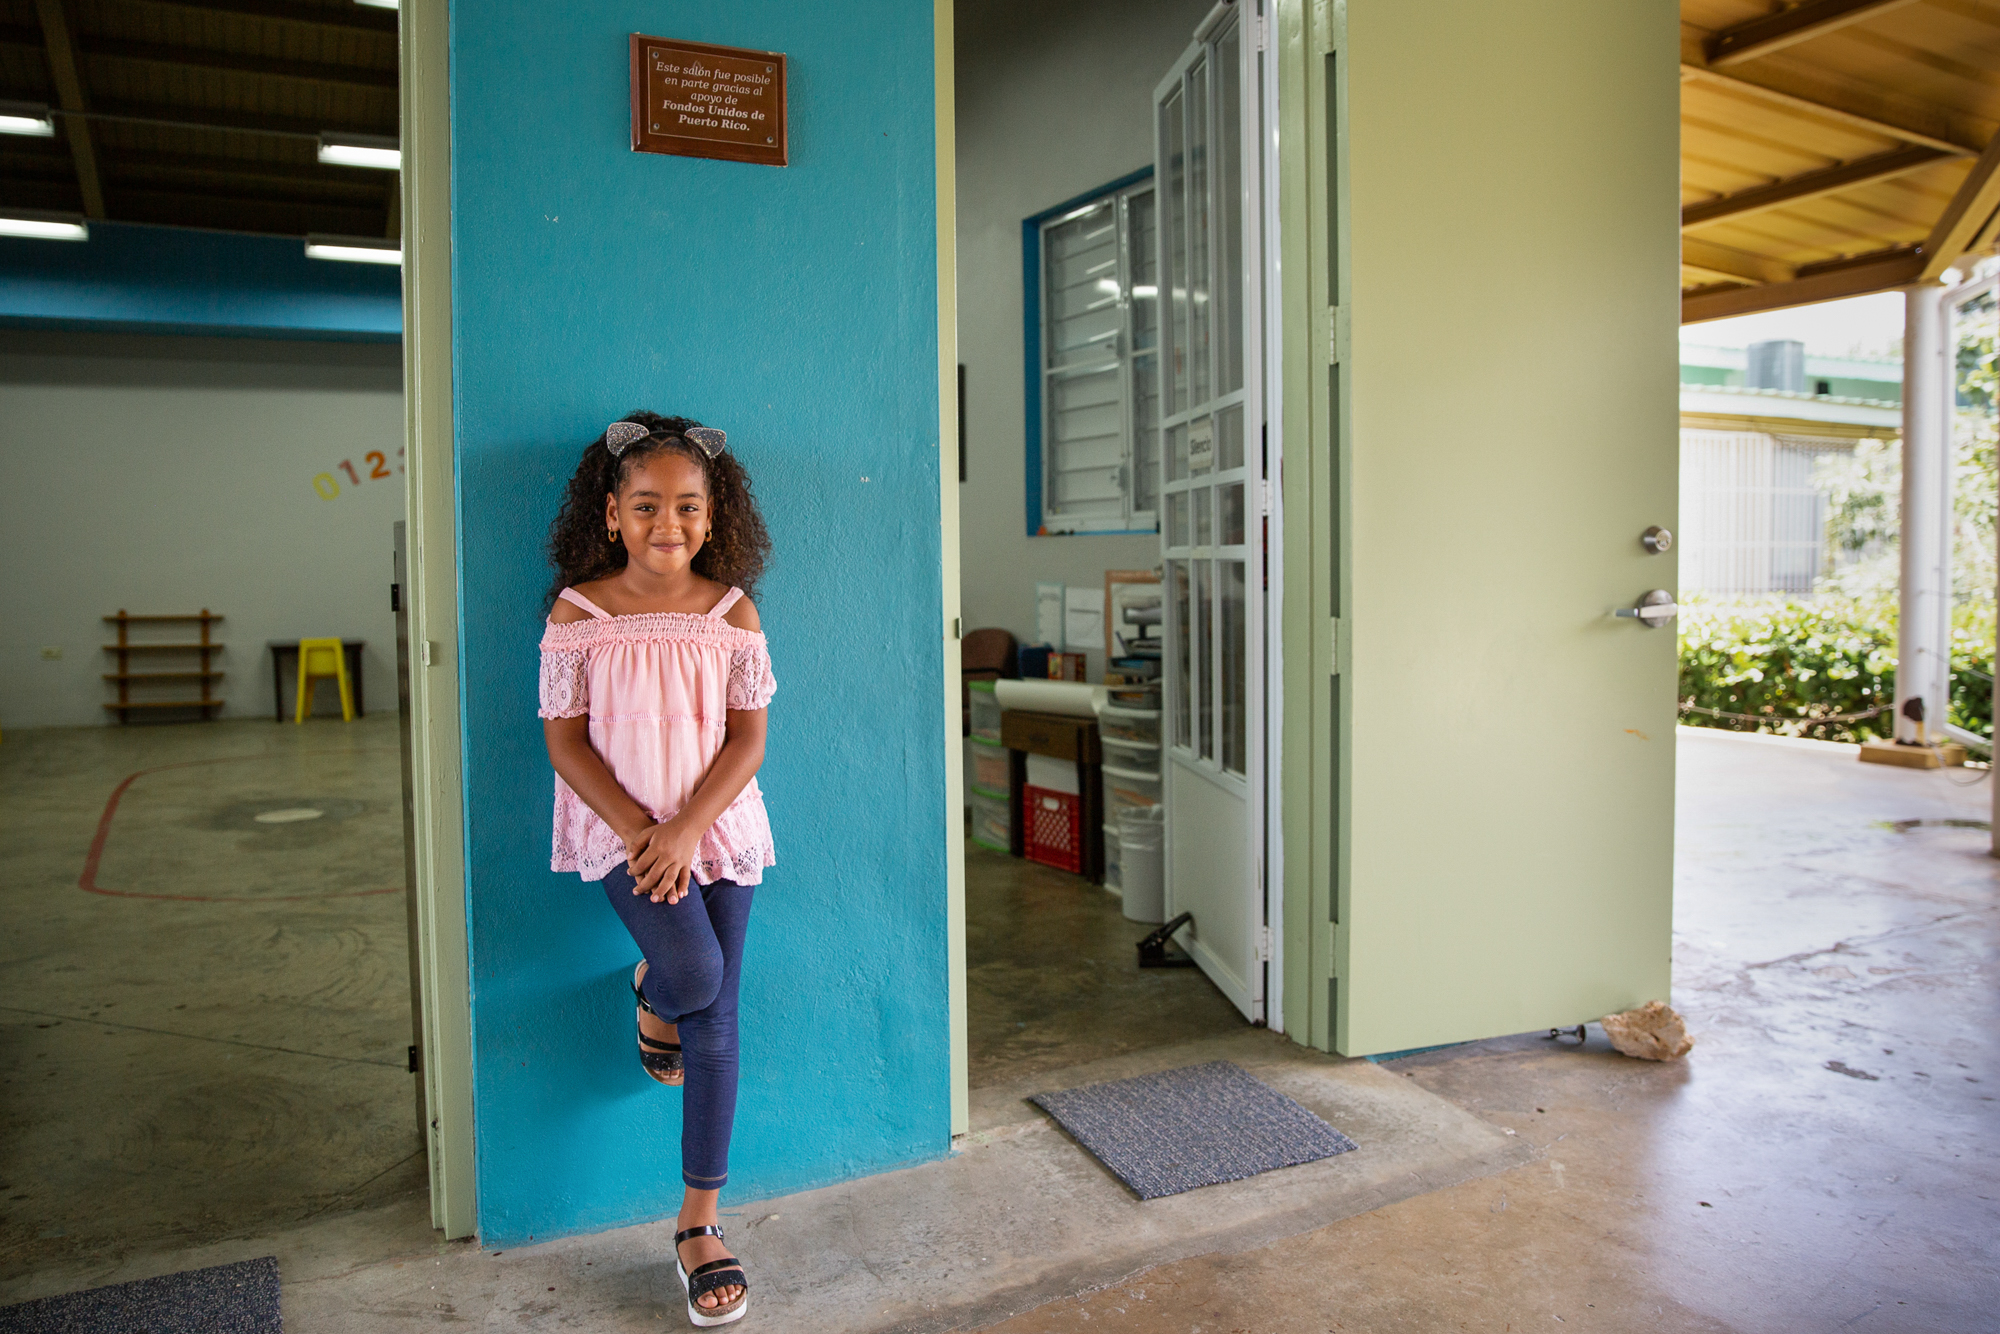 Jailiany Delgado - Jailiany Correa was 5 when Hurricane Maria slammed into Puerto Rico. She doesn't remember much about the storm, but her grandmother says the girl just wanted to return home. “She would call me every day and be like, 'I want to go back home, I want to go back home, I want to see you,'” Deborah Delgado said. (Ellen O'Brien/News21)